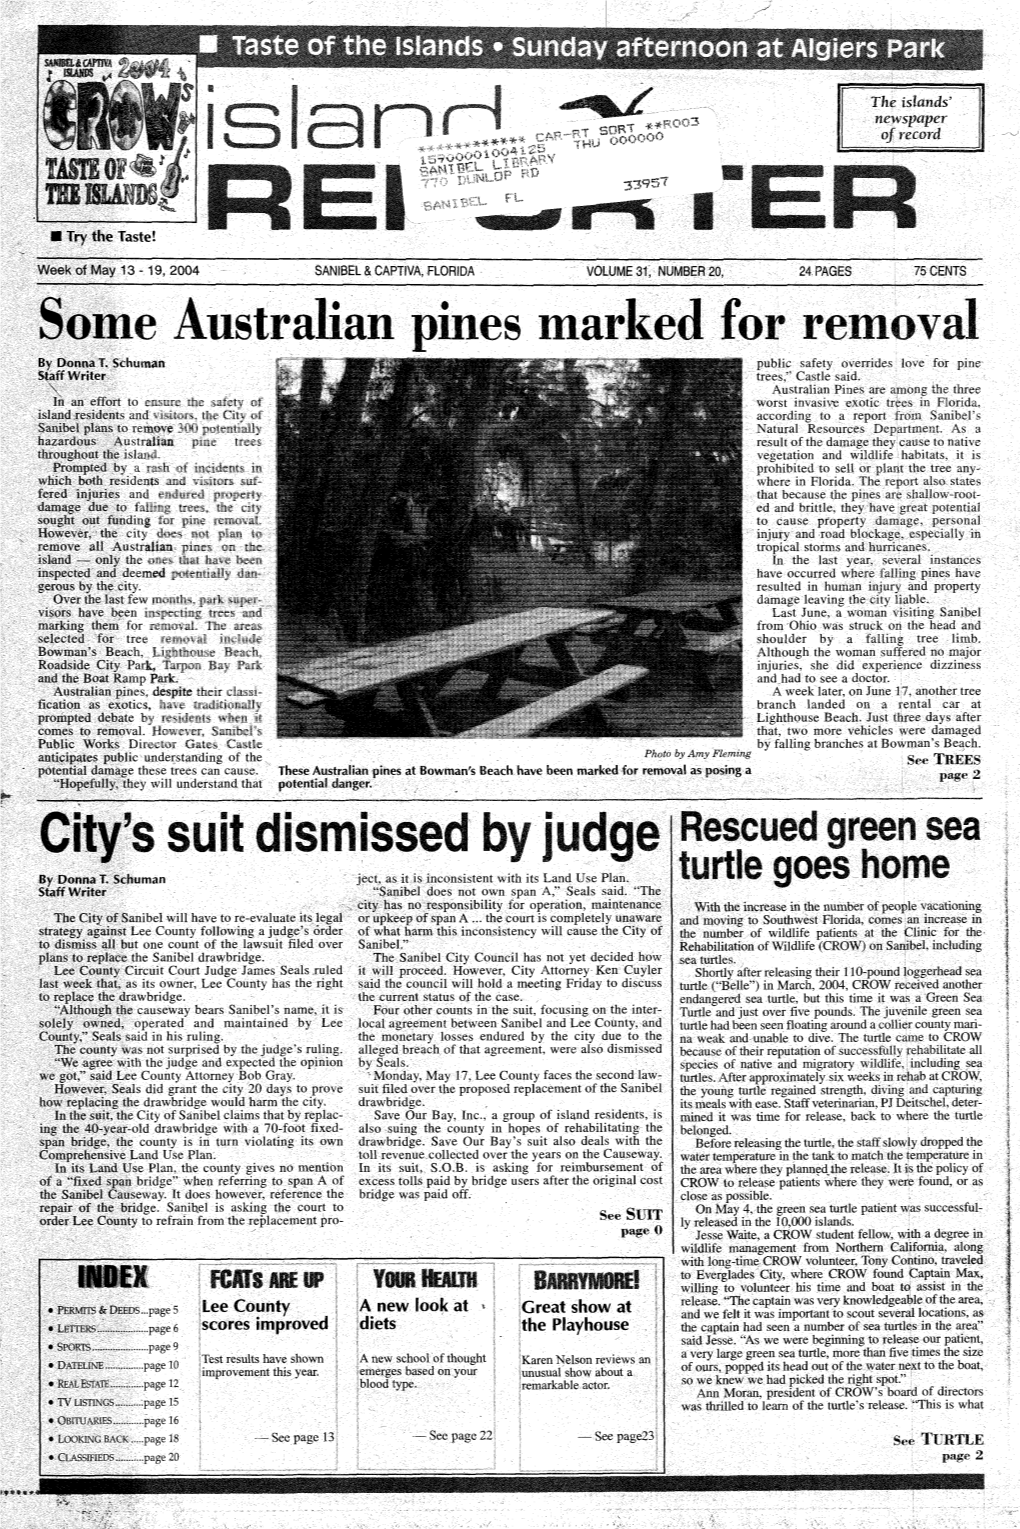 Some Australian Pines Marked for Removal City's Suit